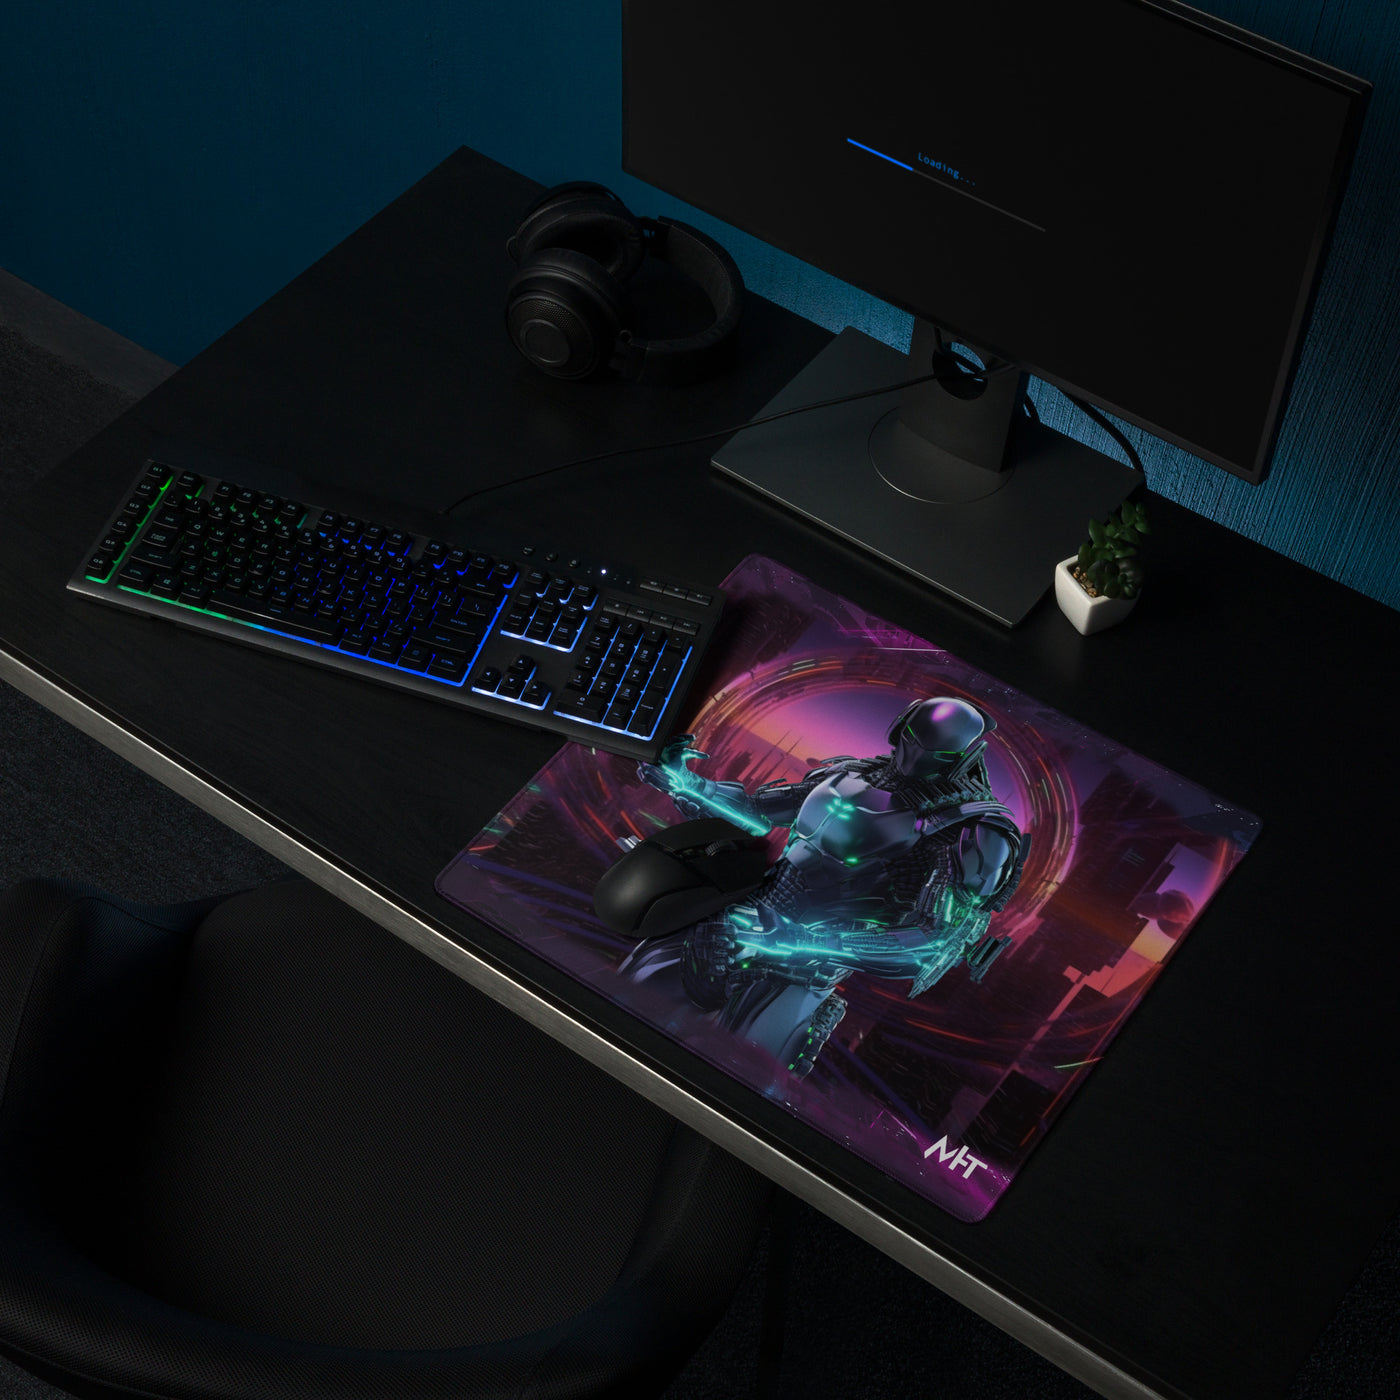 Alex Cyberion Entering the portal - Gaming mouse pad